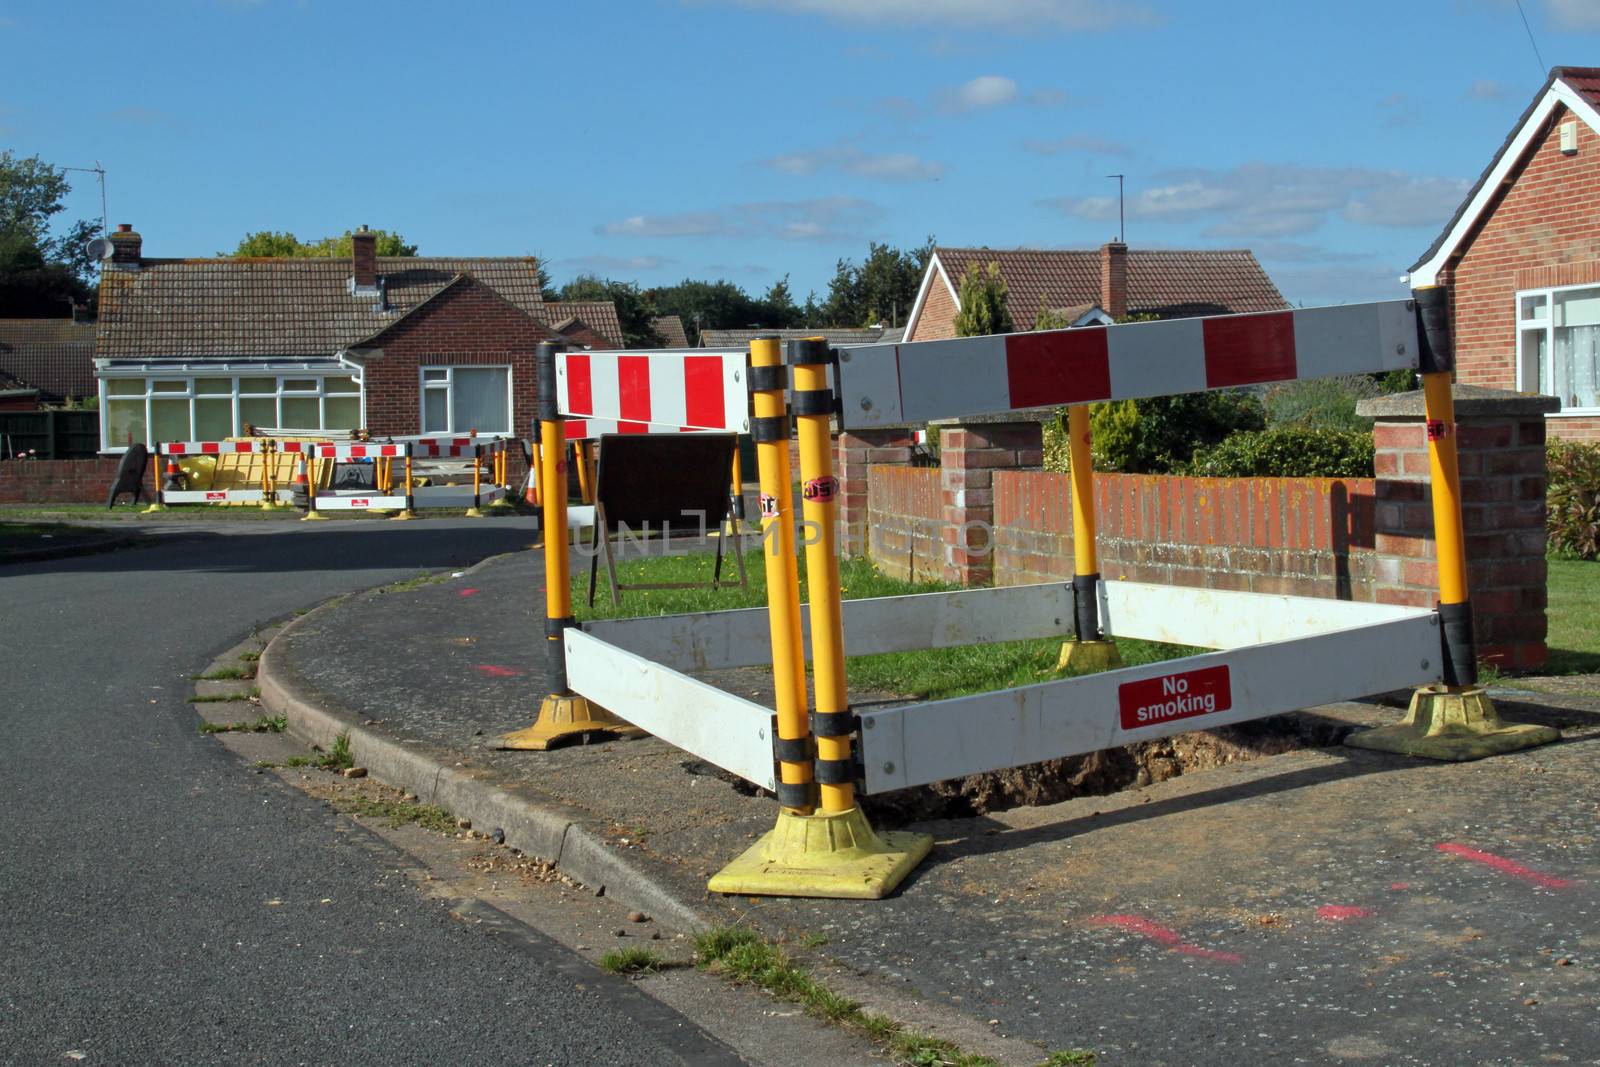 Road work warning signs and barriers in a street in England. 